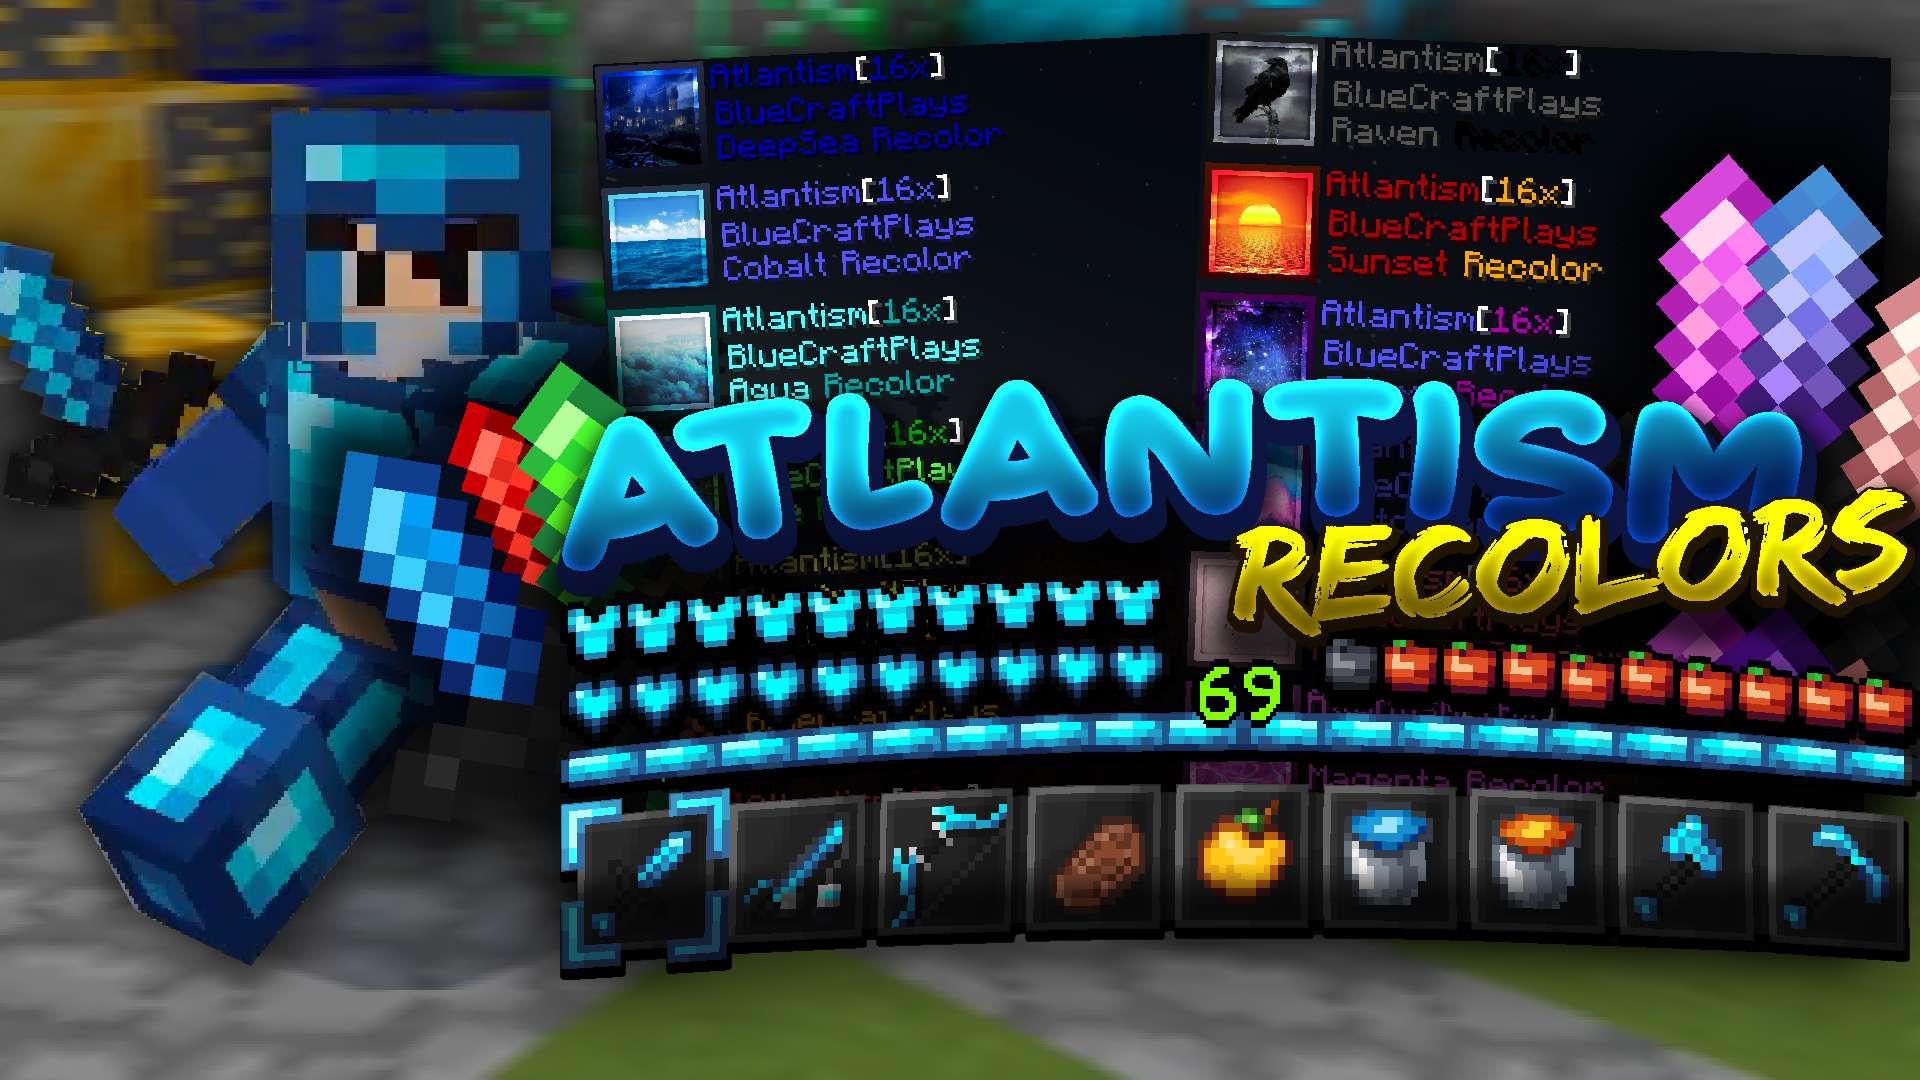 Atlantism Rose-Gold Recolor 16x by Blueue on PvPRP